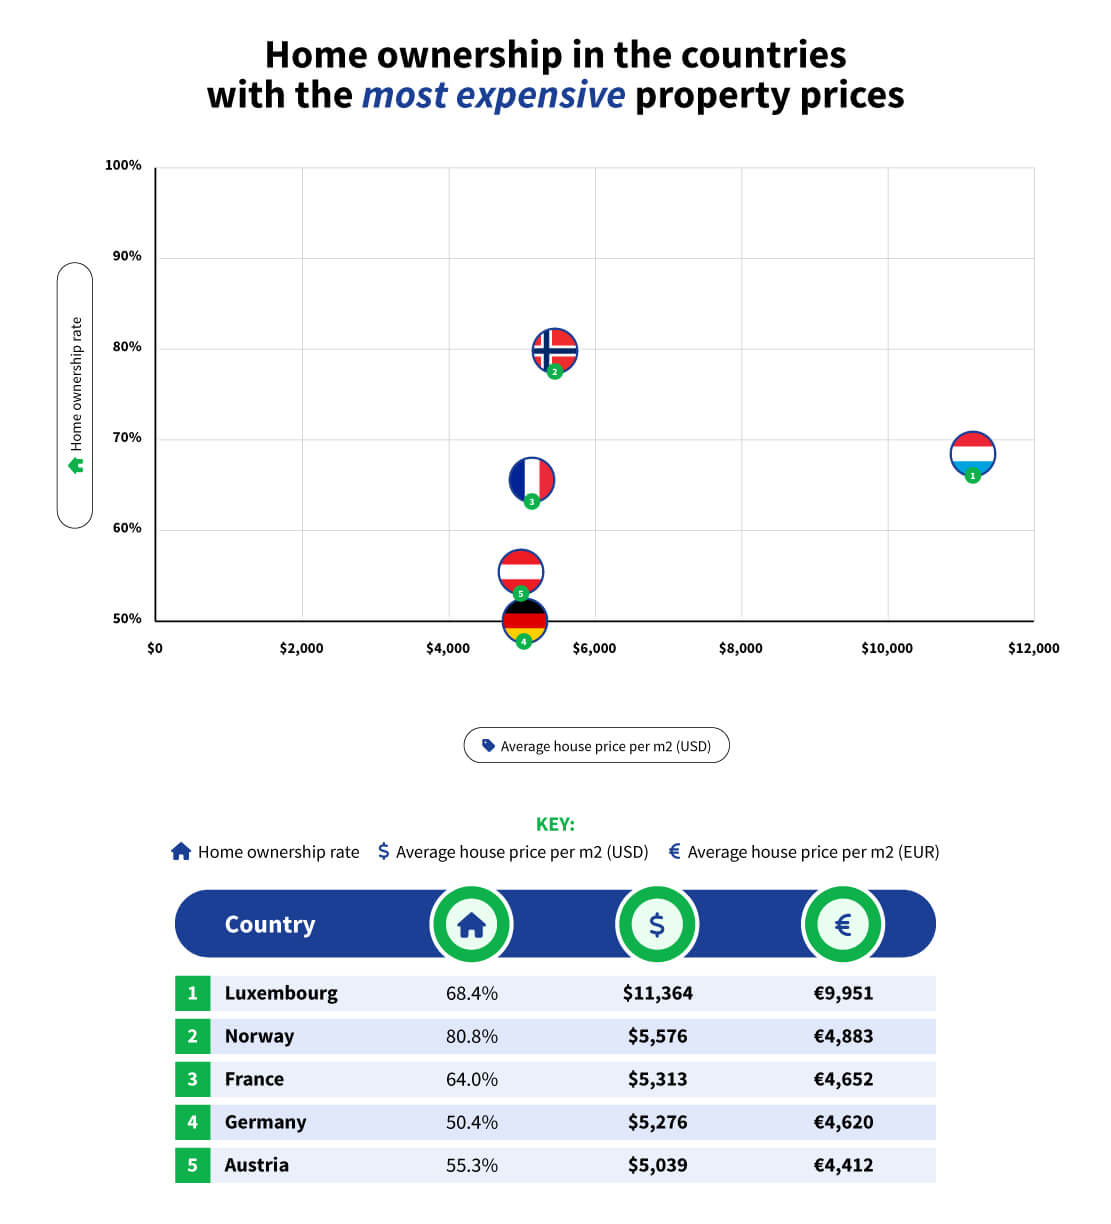 Home ownership in the countries with the most expensive property prices